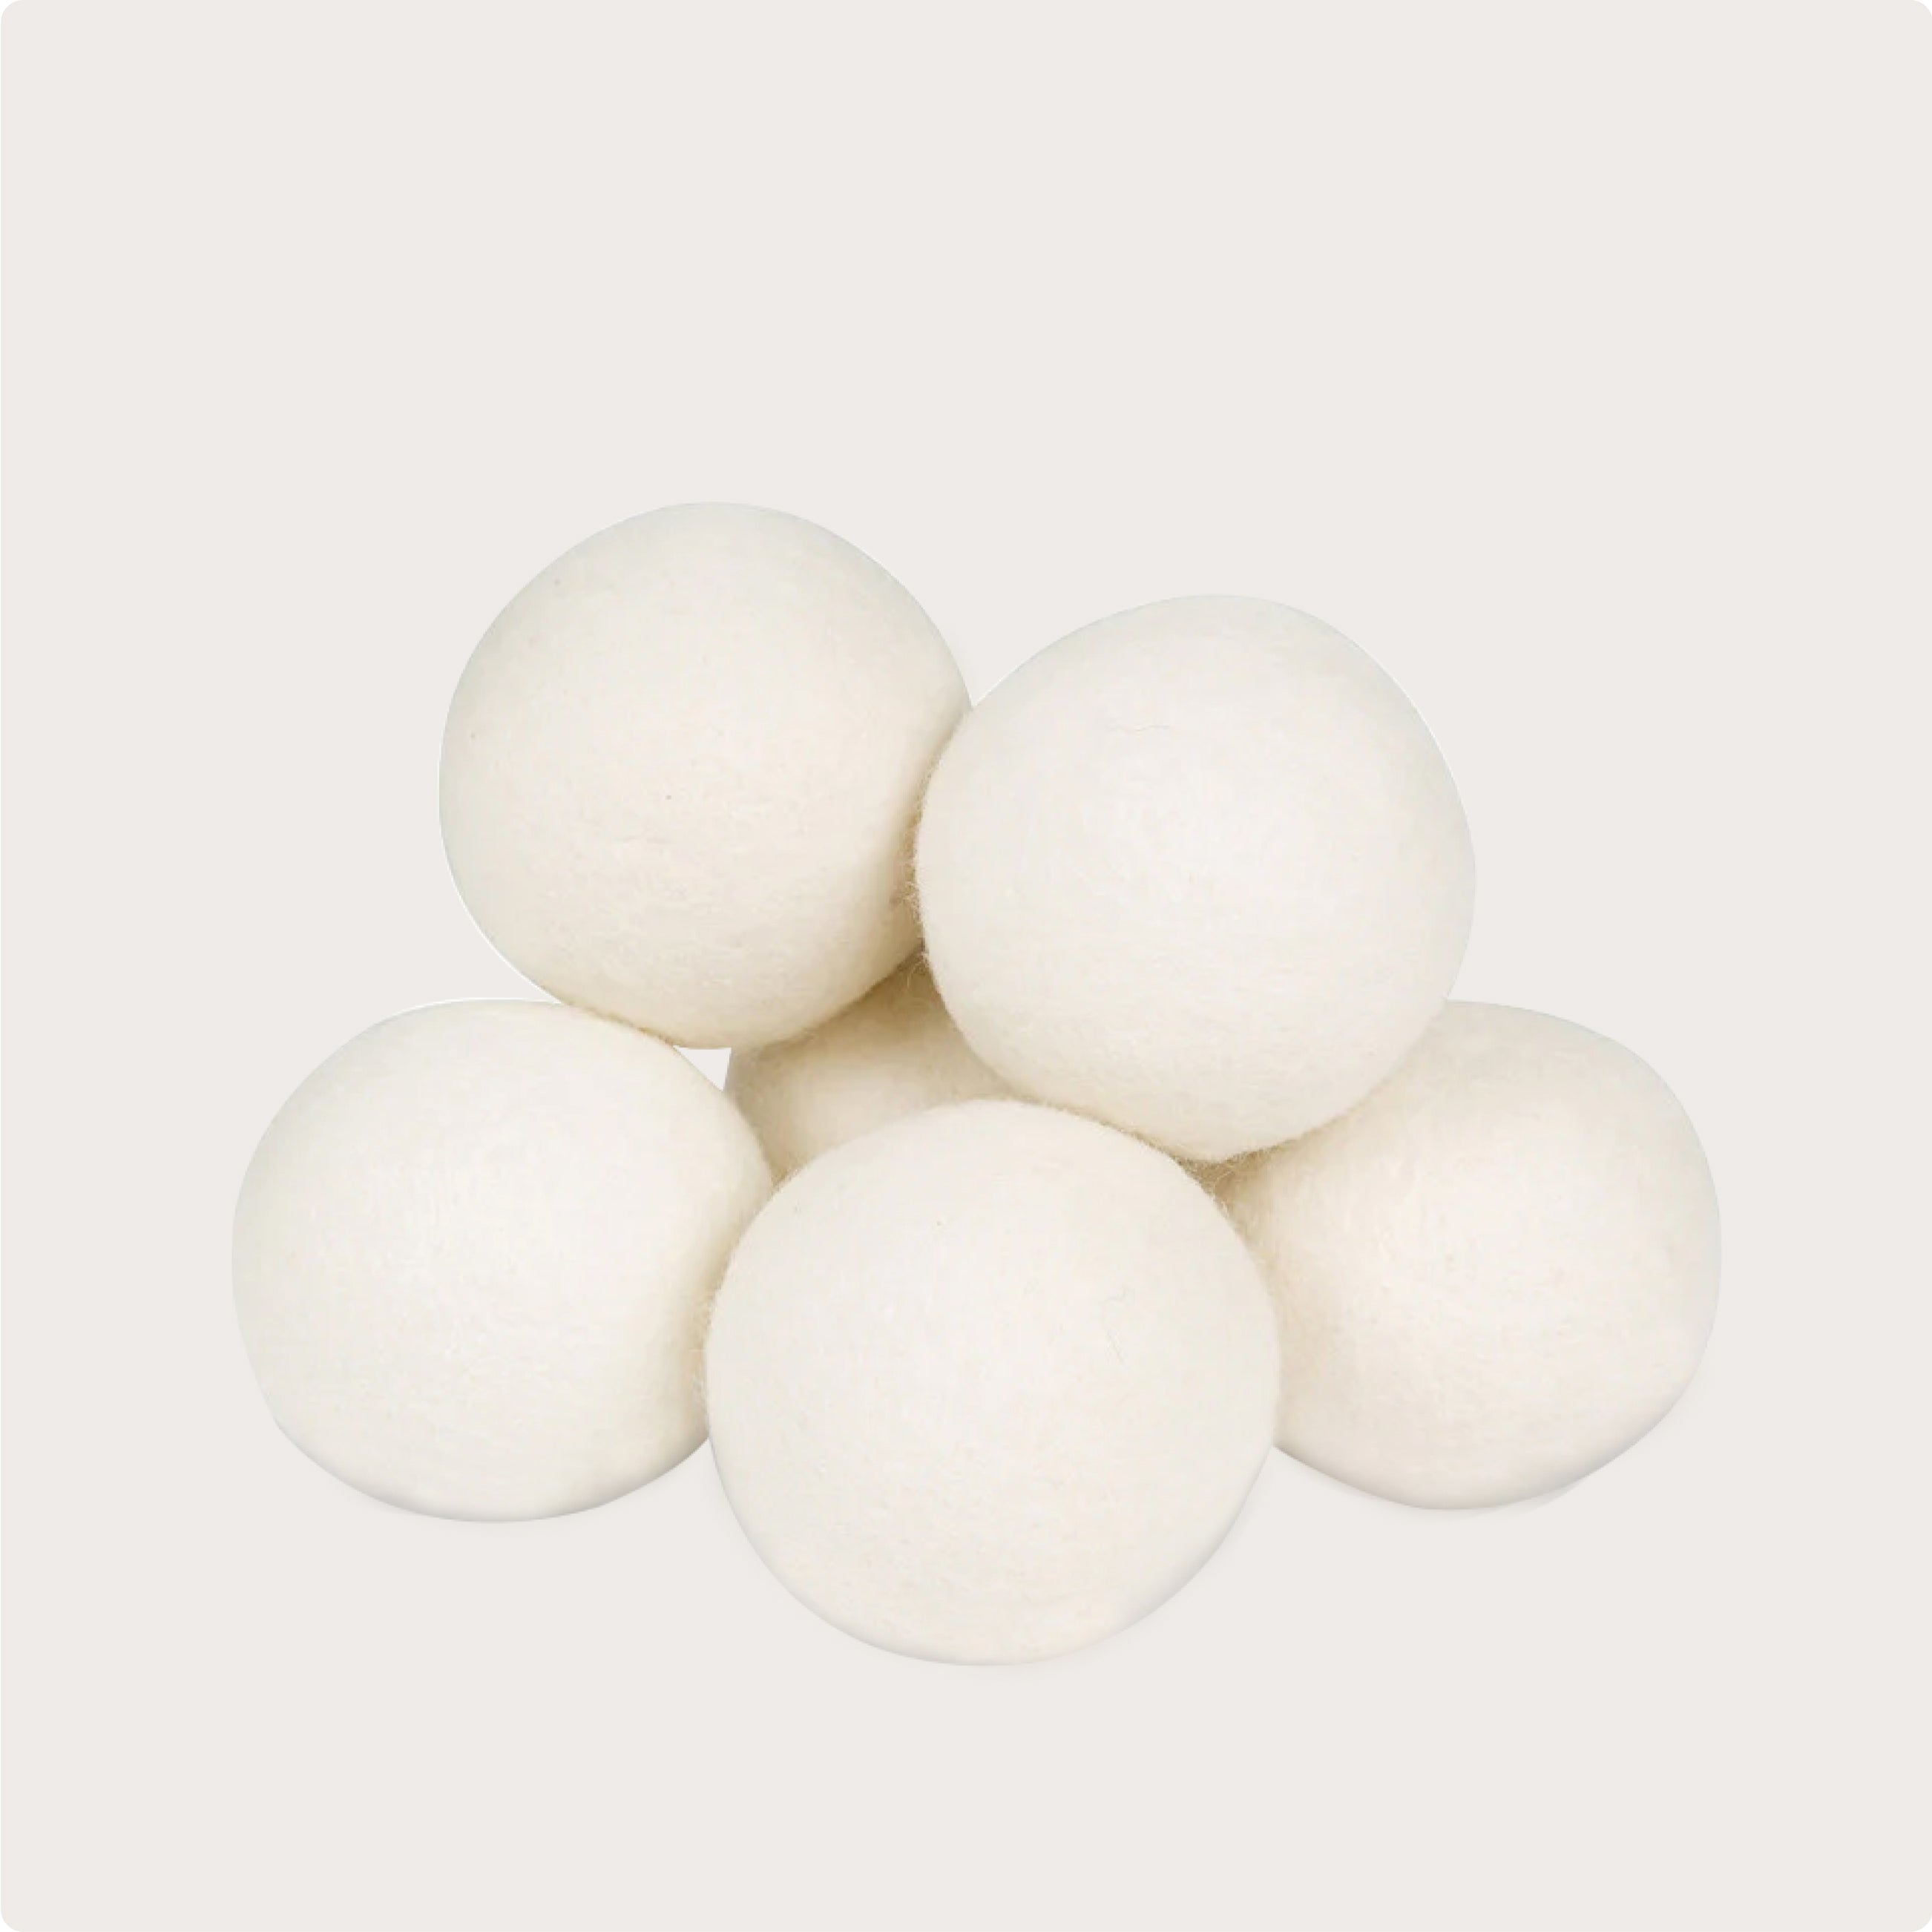 Wool Dryer Ball Made in USA